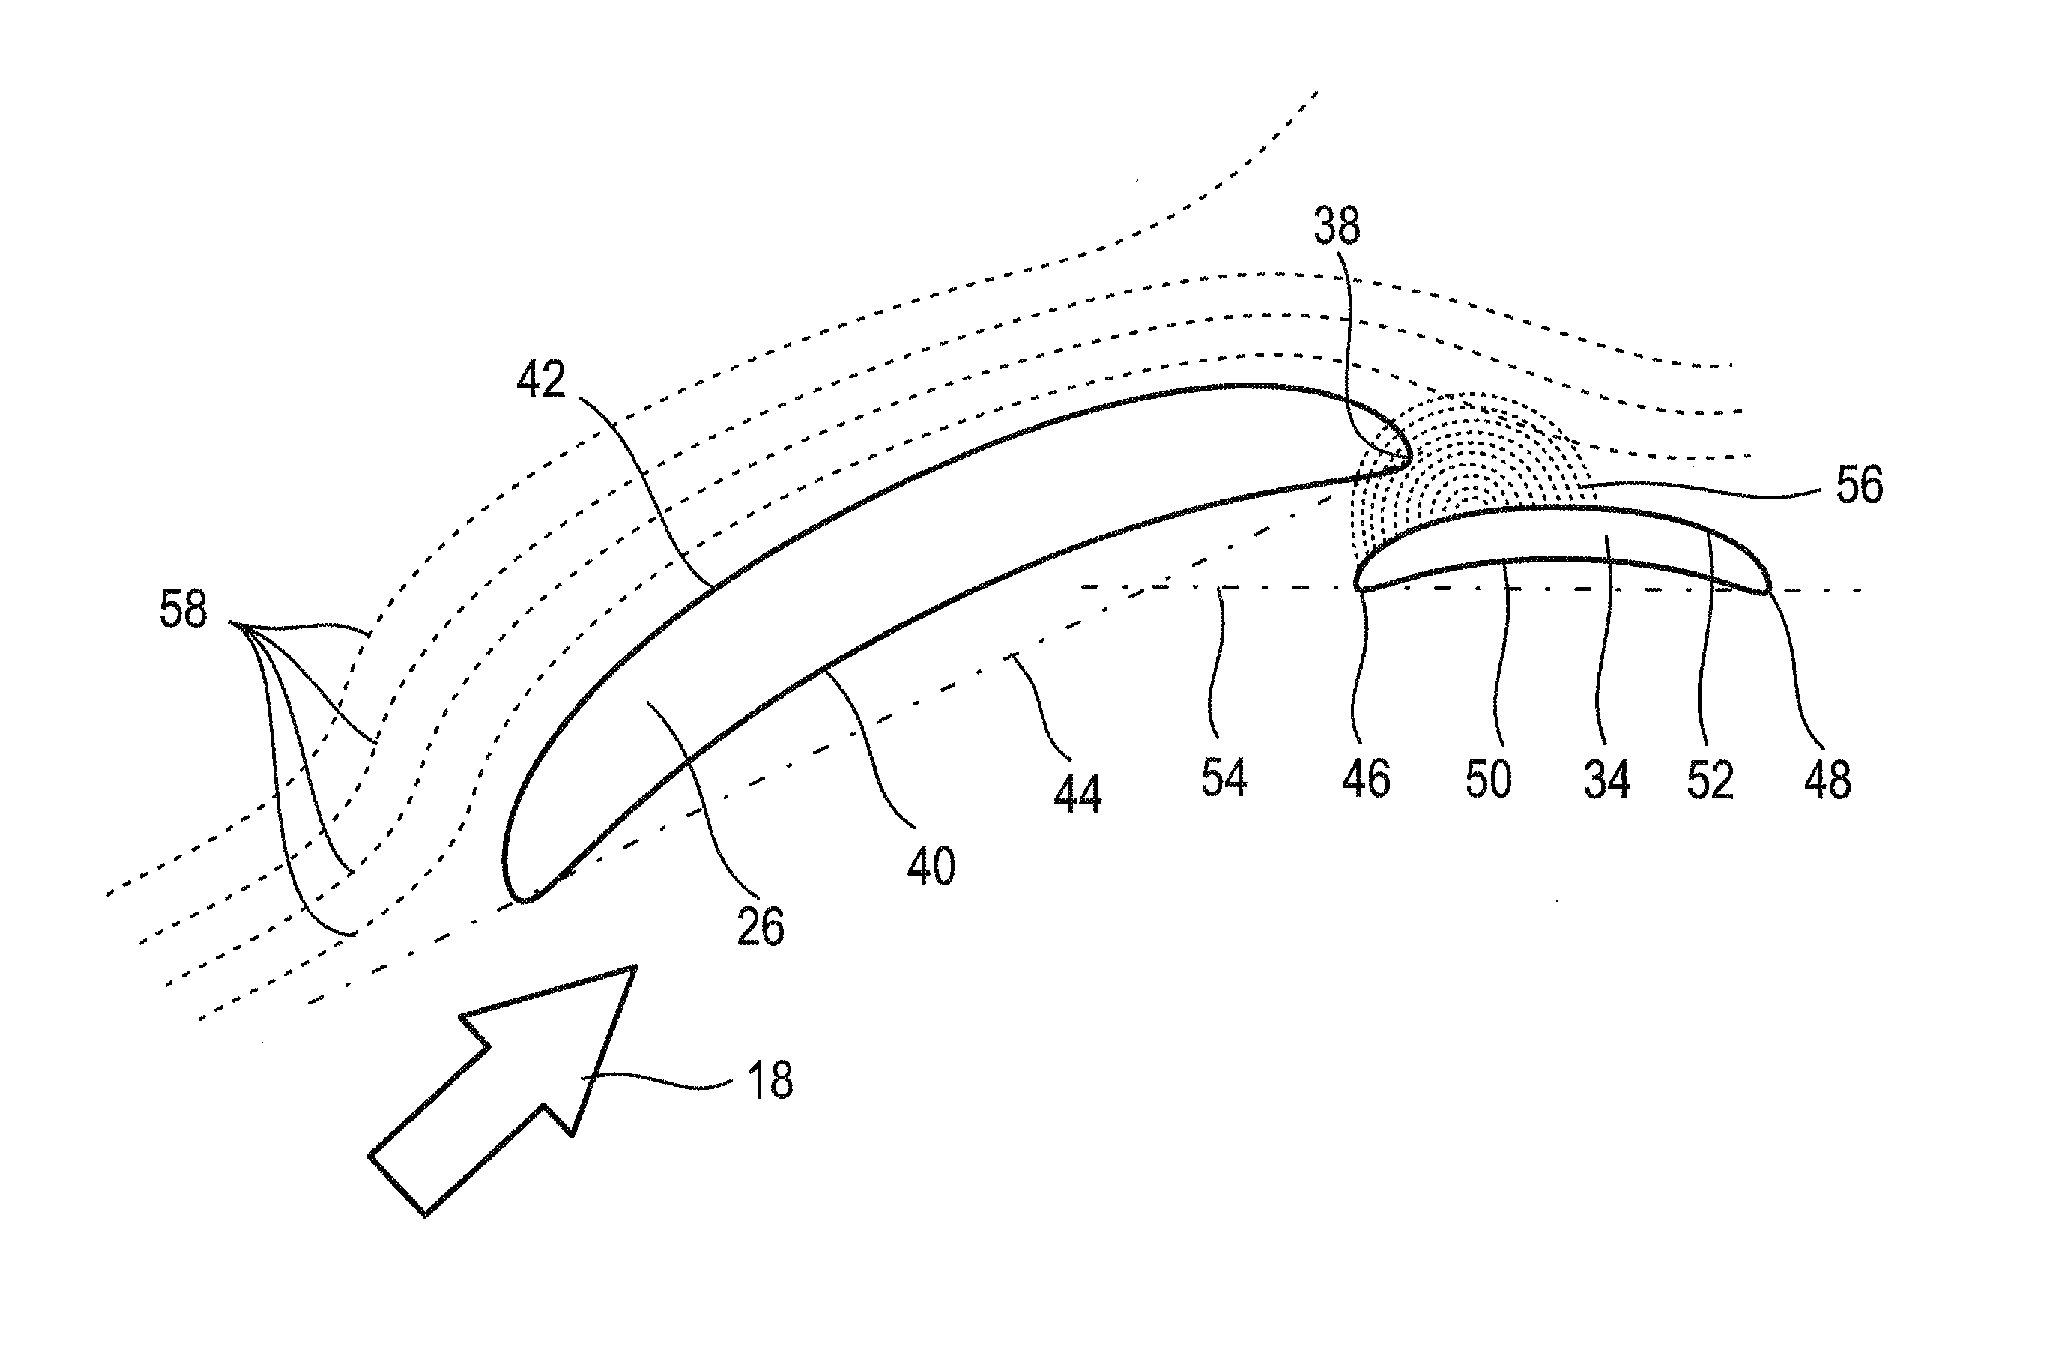 Axial Turbomachine Stator with Ailerons at the Blade Roots